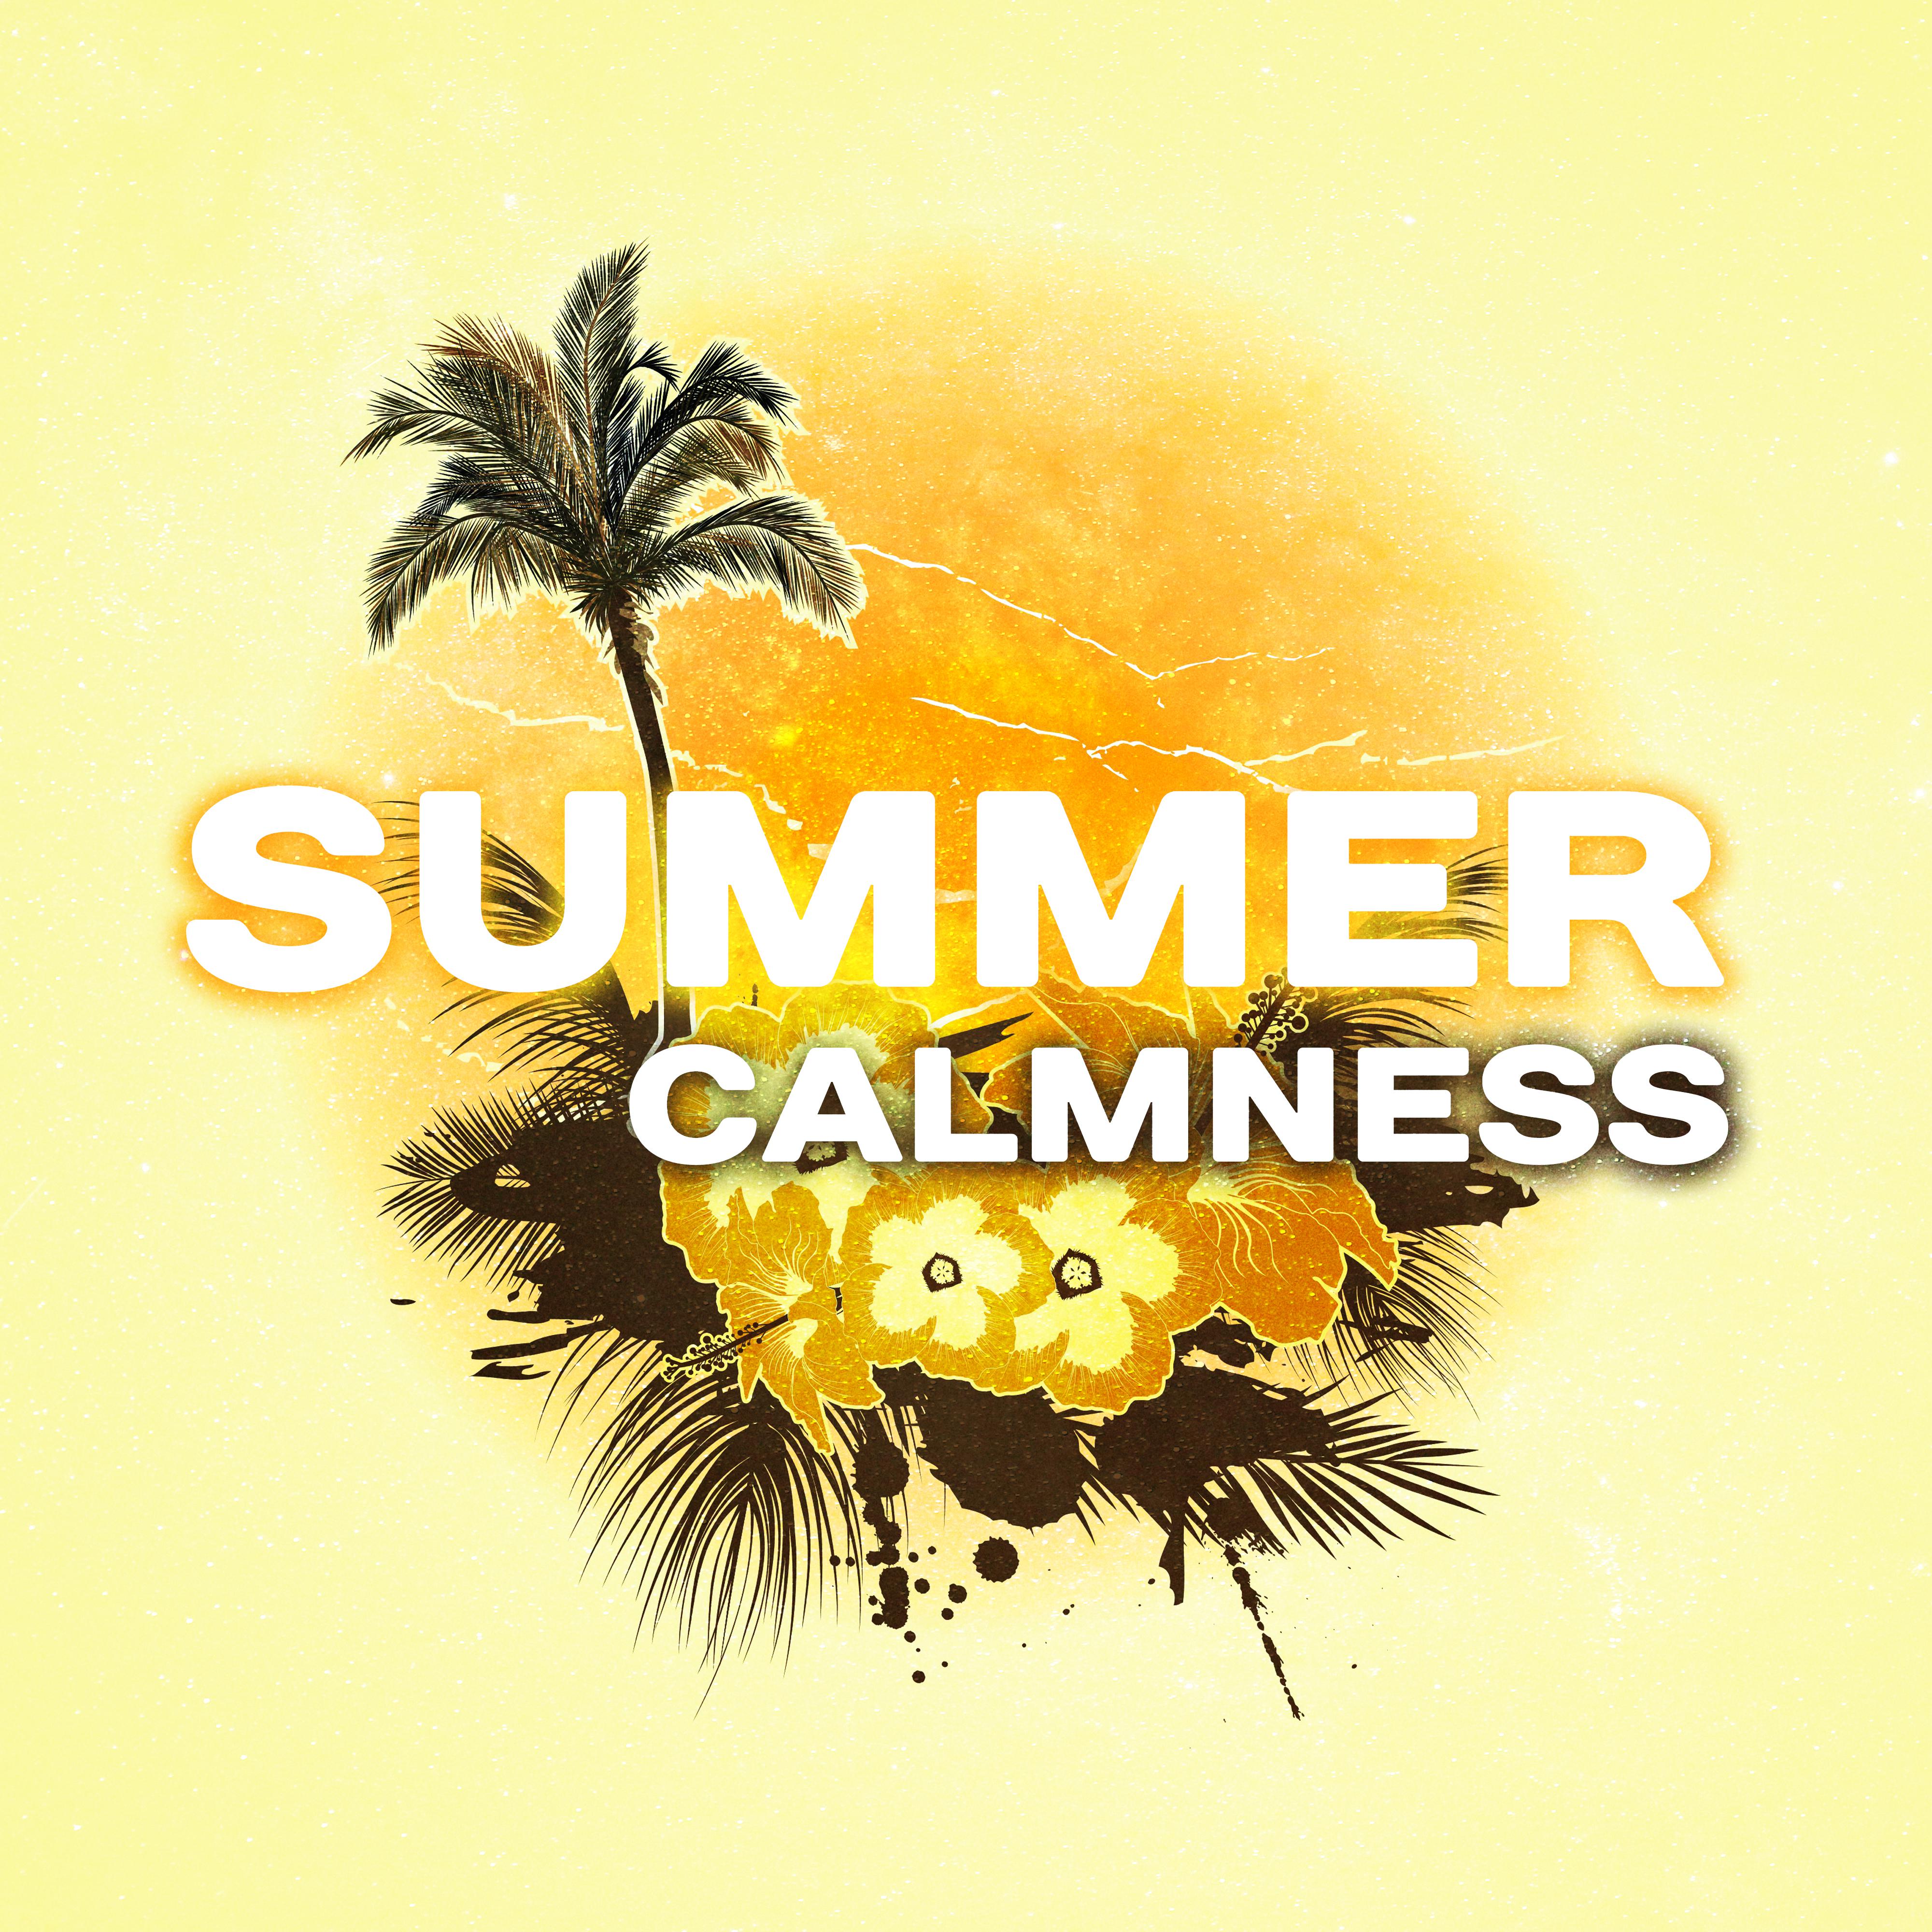 Summer Calmness – Chill Out Melodies to Relax, Holiday Vibes, Time to Rest, Beach Relaxation